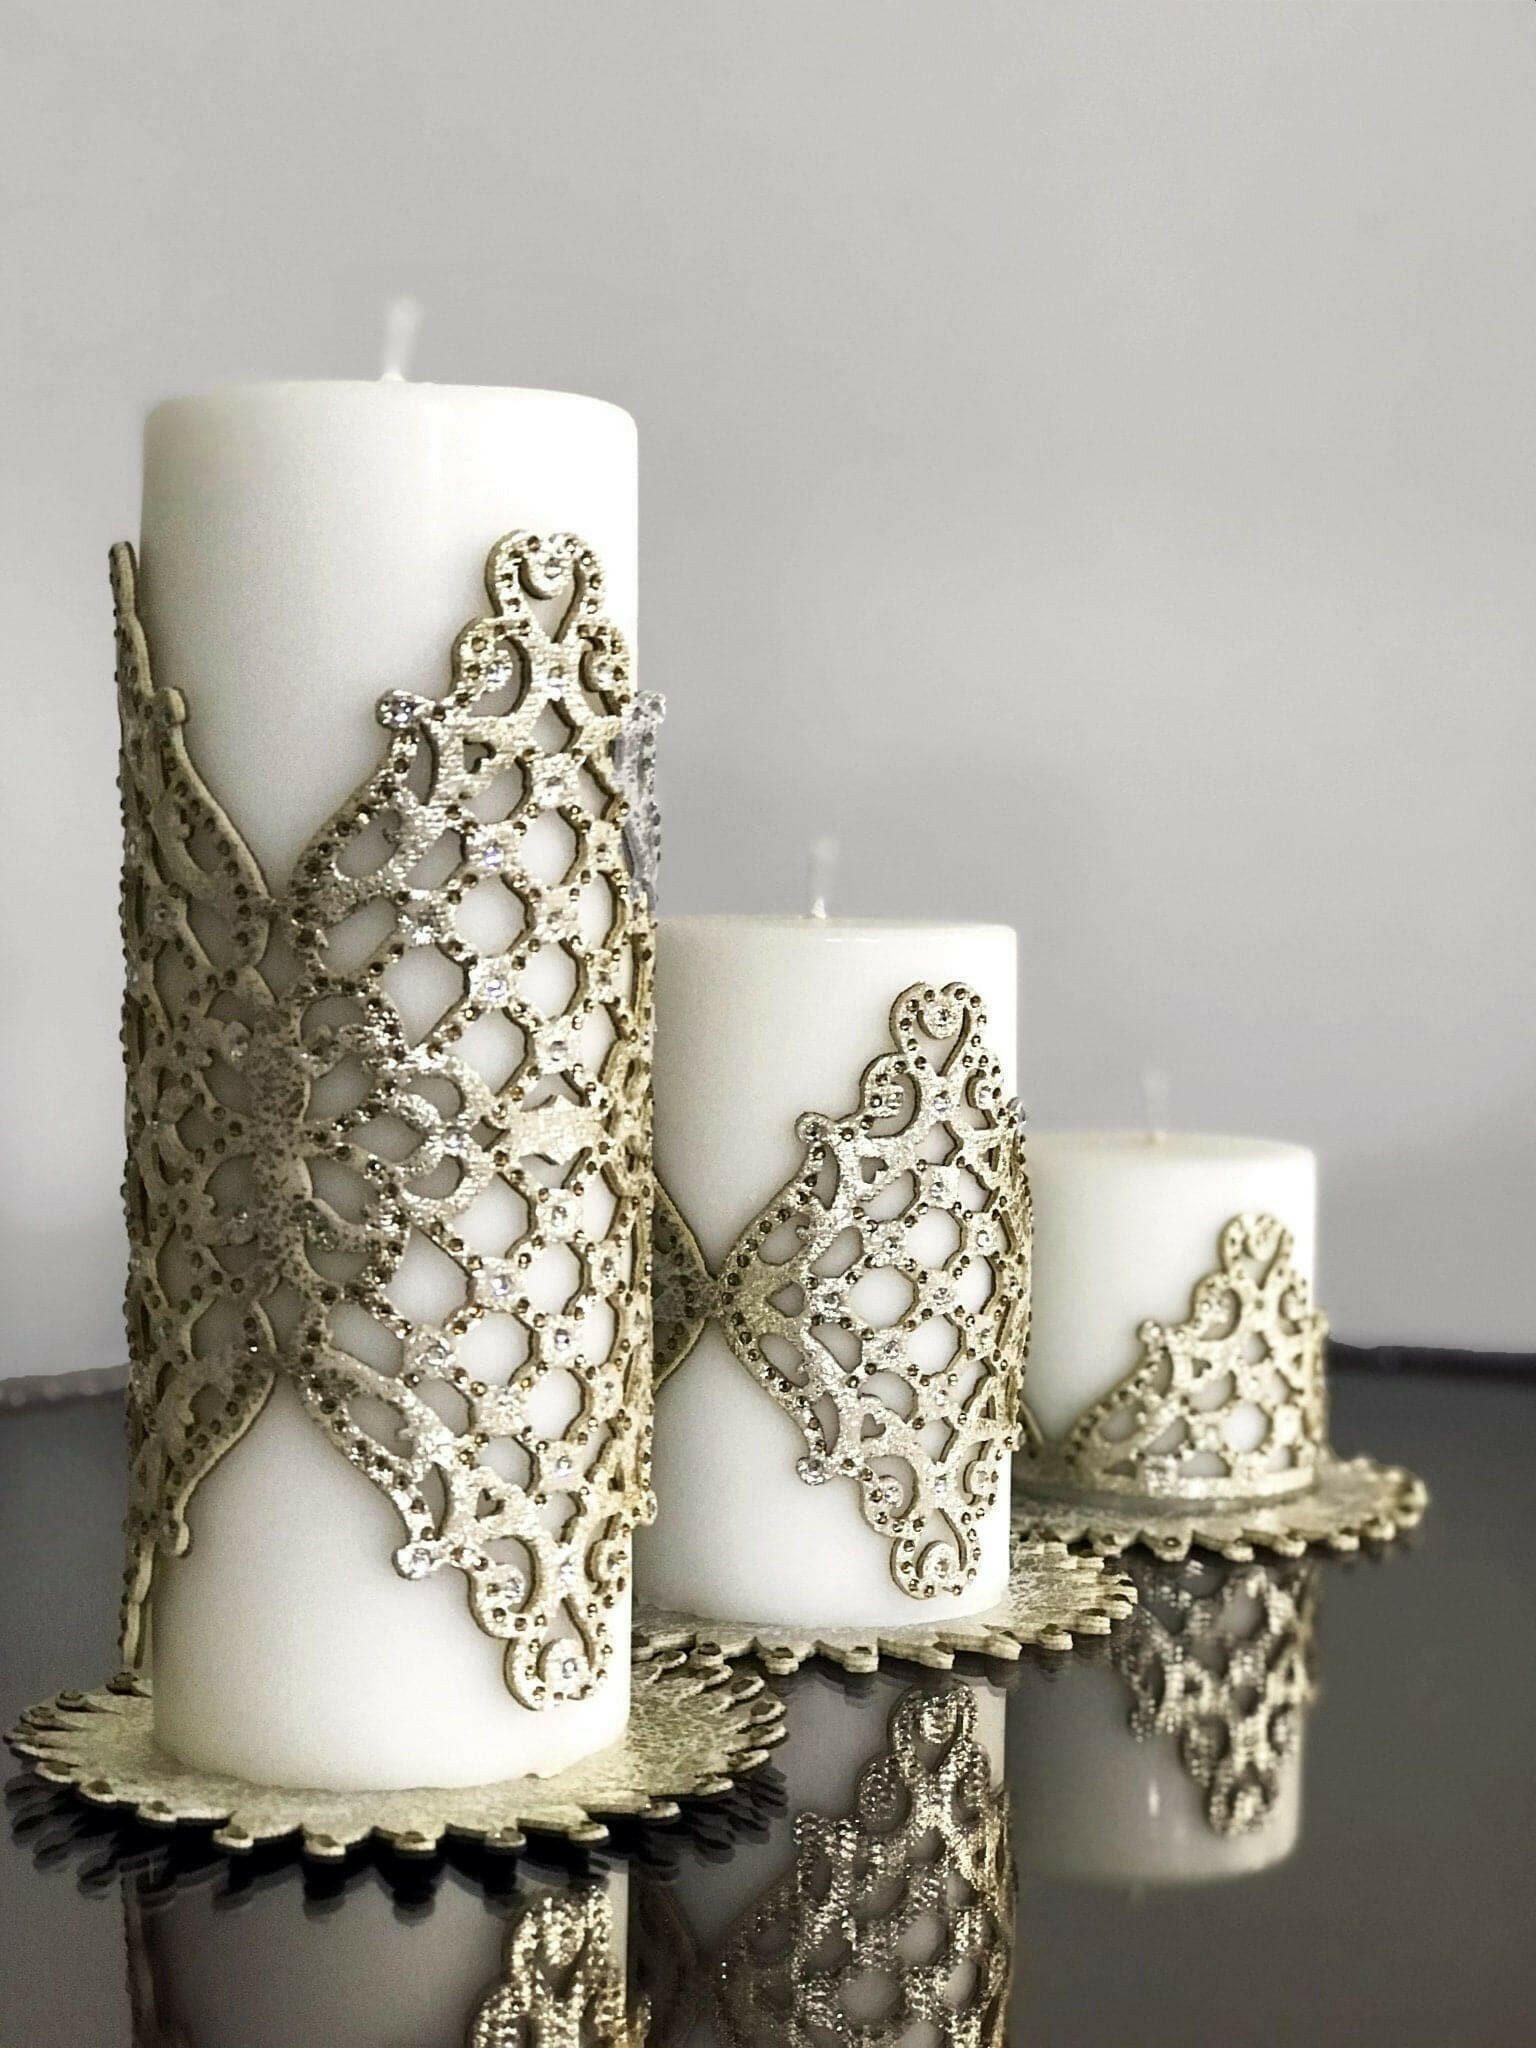 Mihrace Petrol Gold Candle Set of 3, Leather Oriental Pattern, Decorative Candles